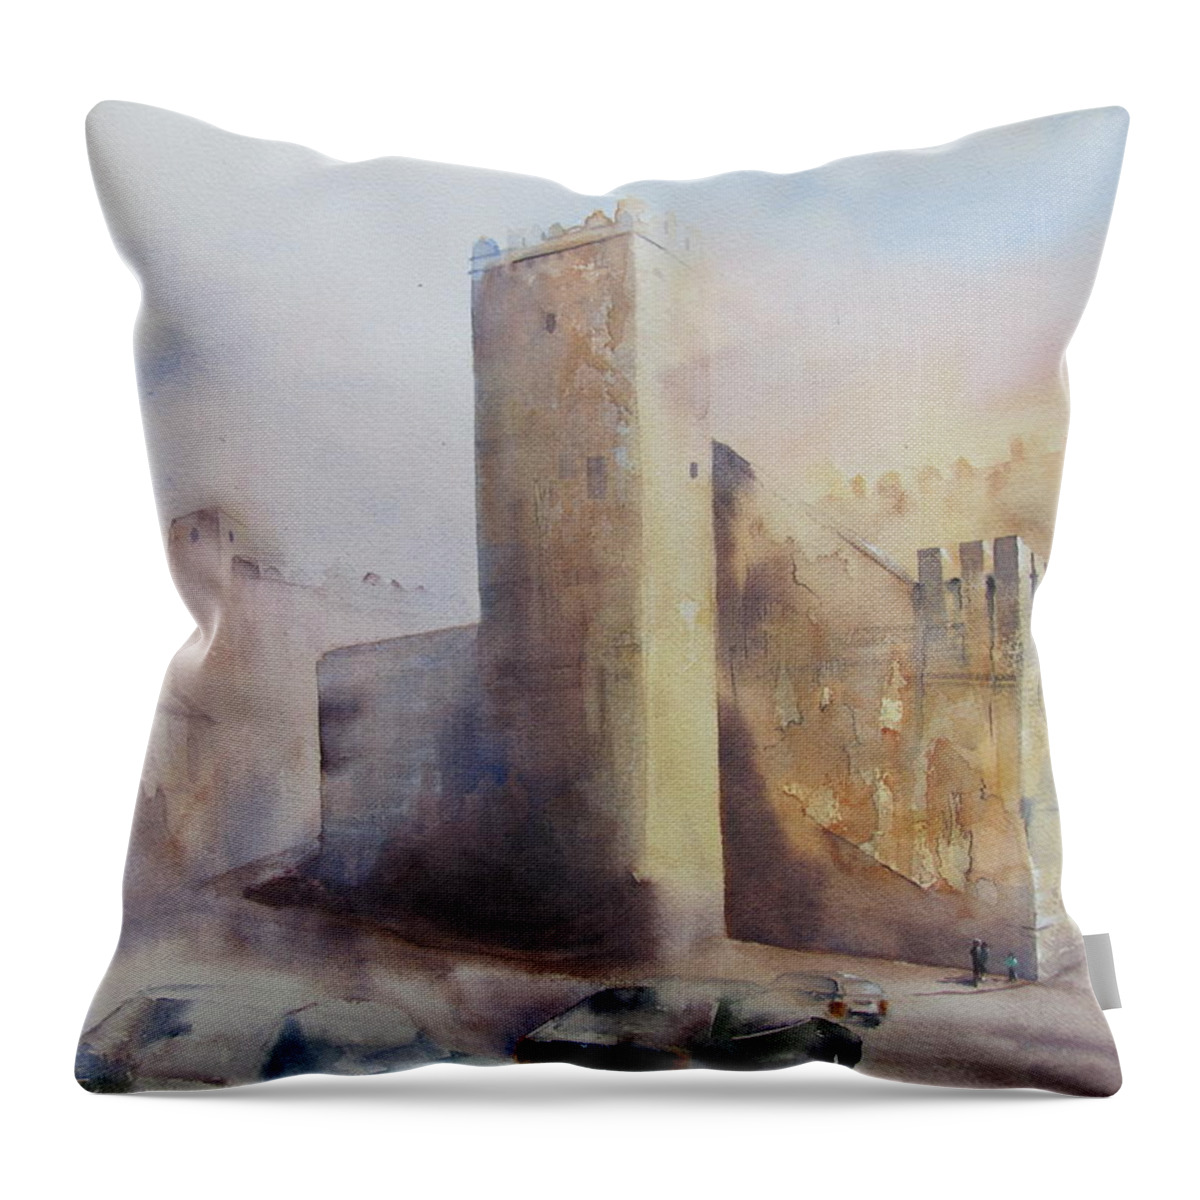 Spain Throw Pillow featuring the painting These Walls Have Seen #2 by Amanda Amend